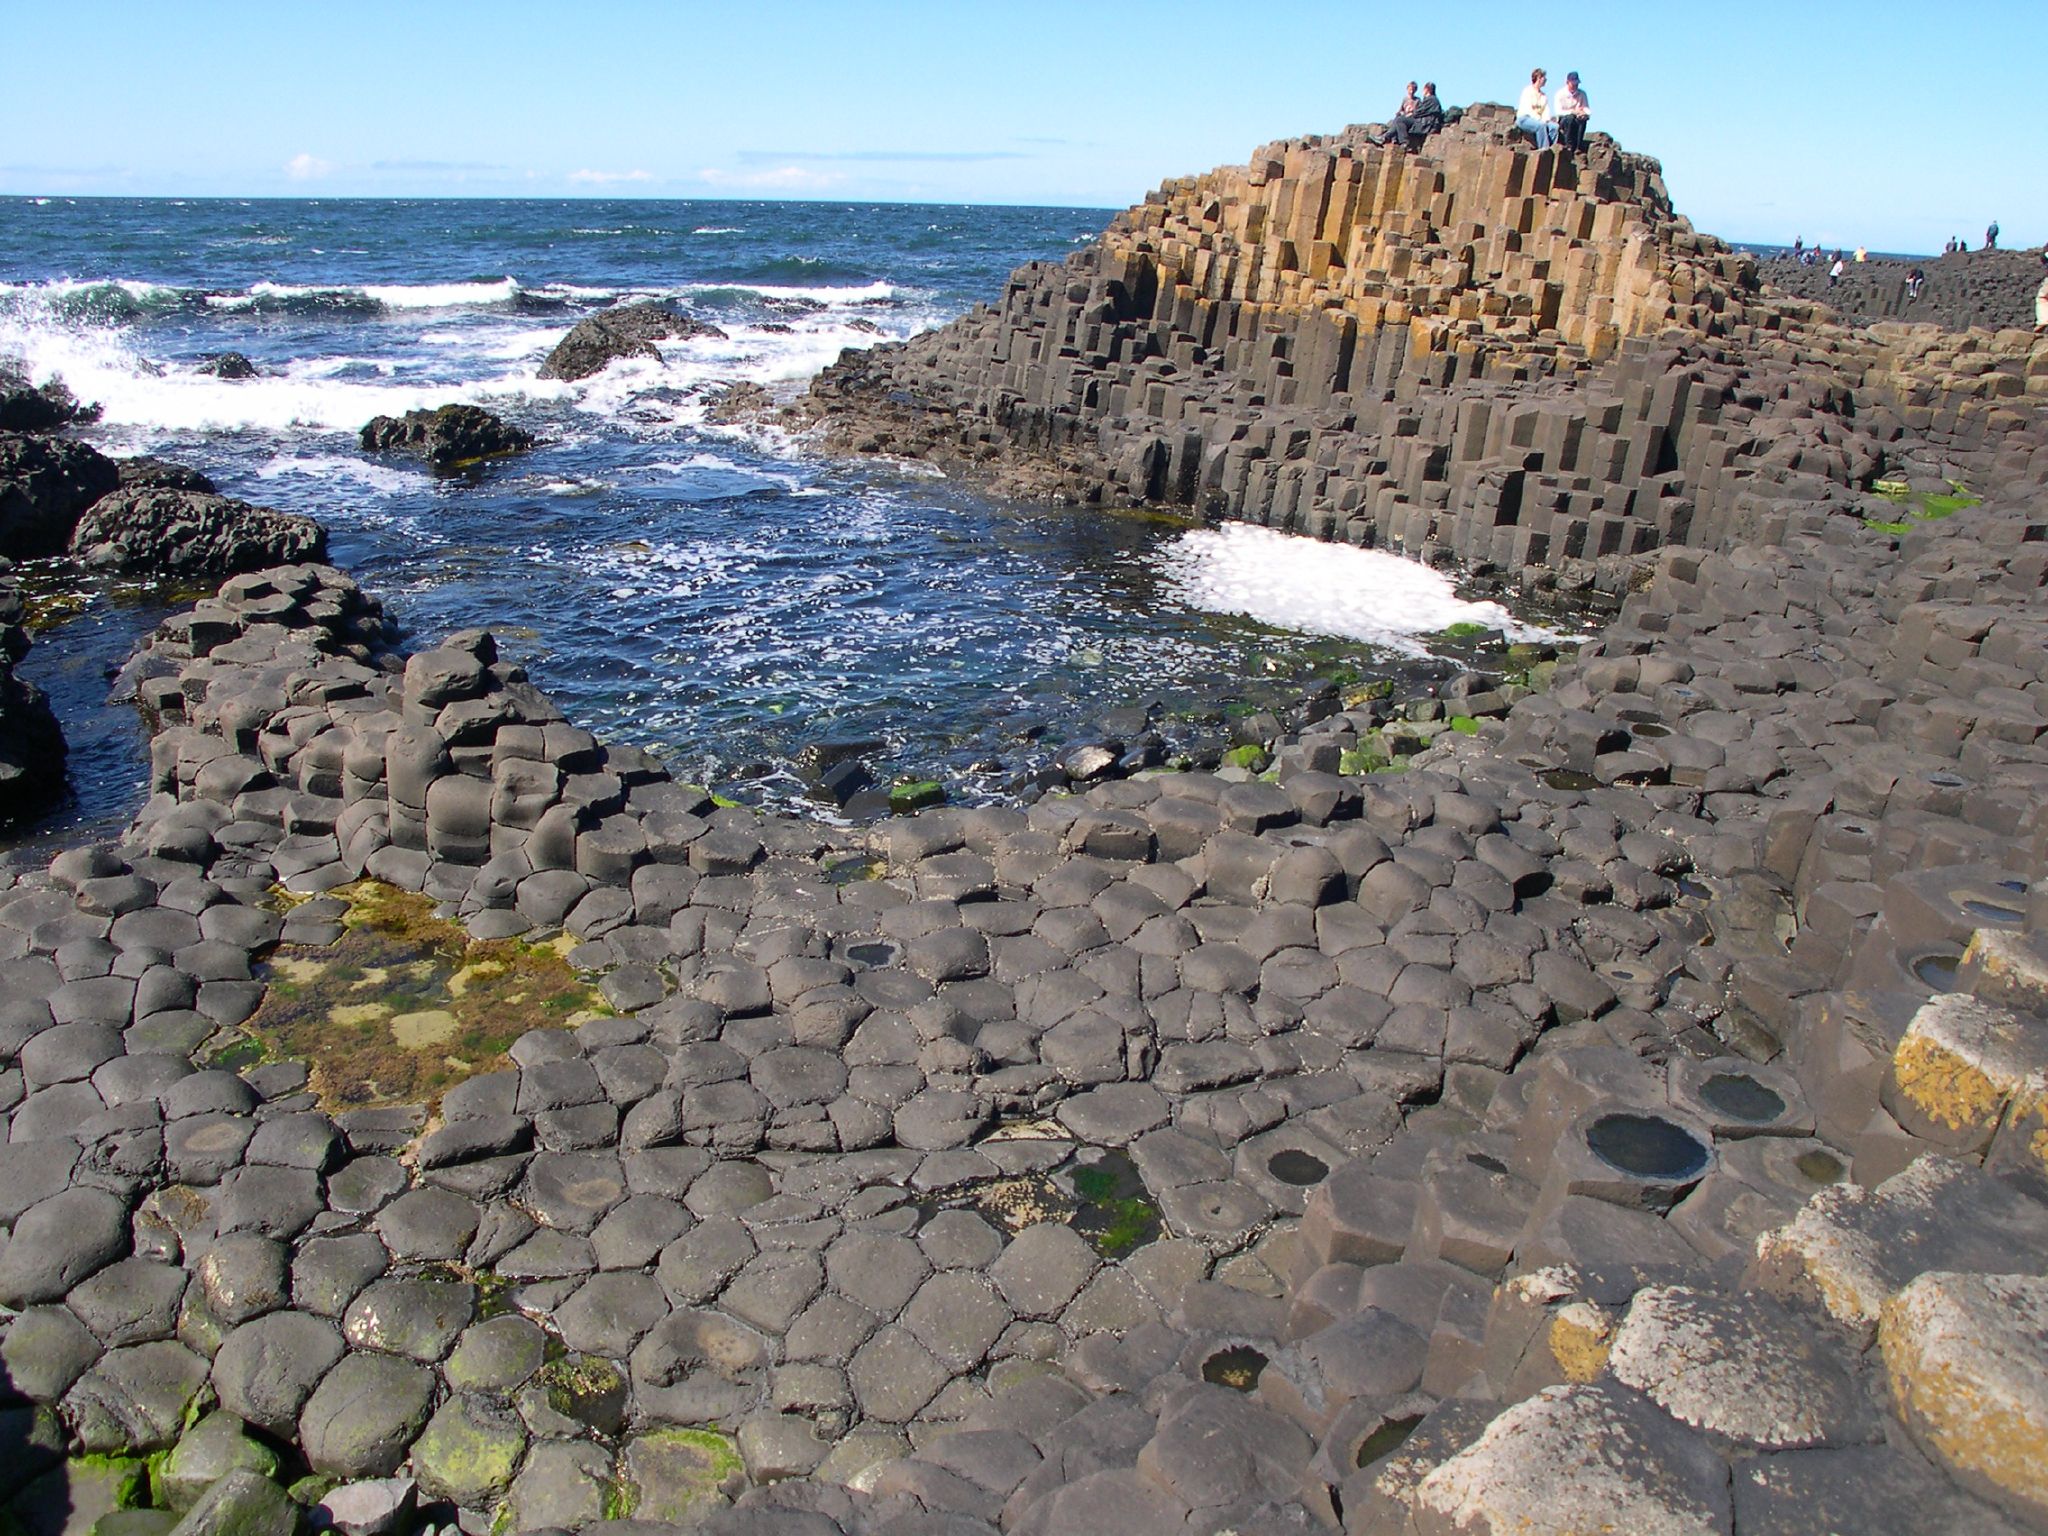 Some tourists visiting the Giant’s Causeway, Northern Ireland